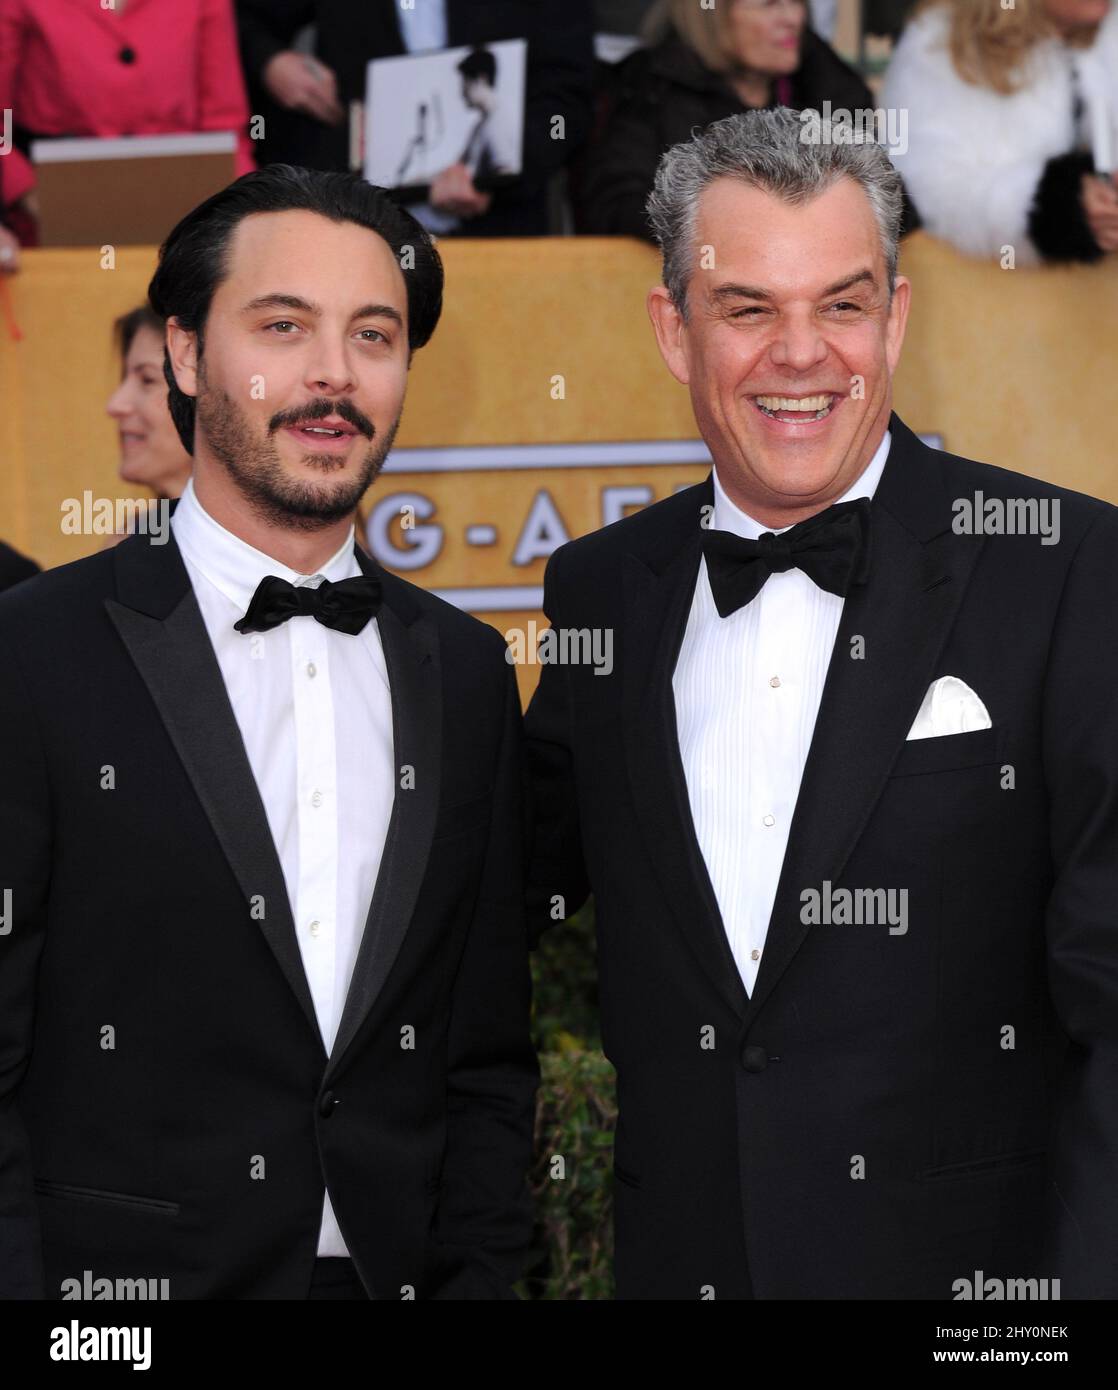 Jack Huston and Danny Huston arriving at the 19th Annual Screen Actor's Guild Awards held at the Shrine Auditorium, Los Angeles. Stock Photo